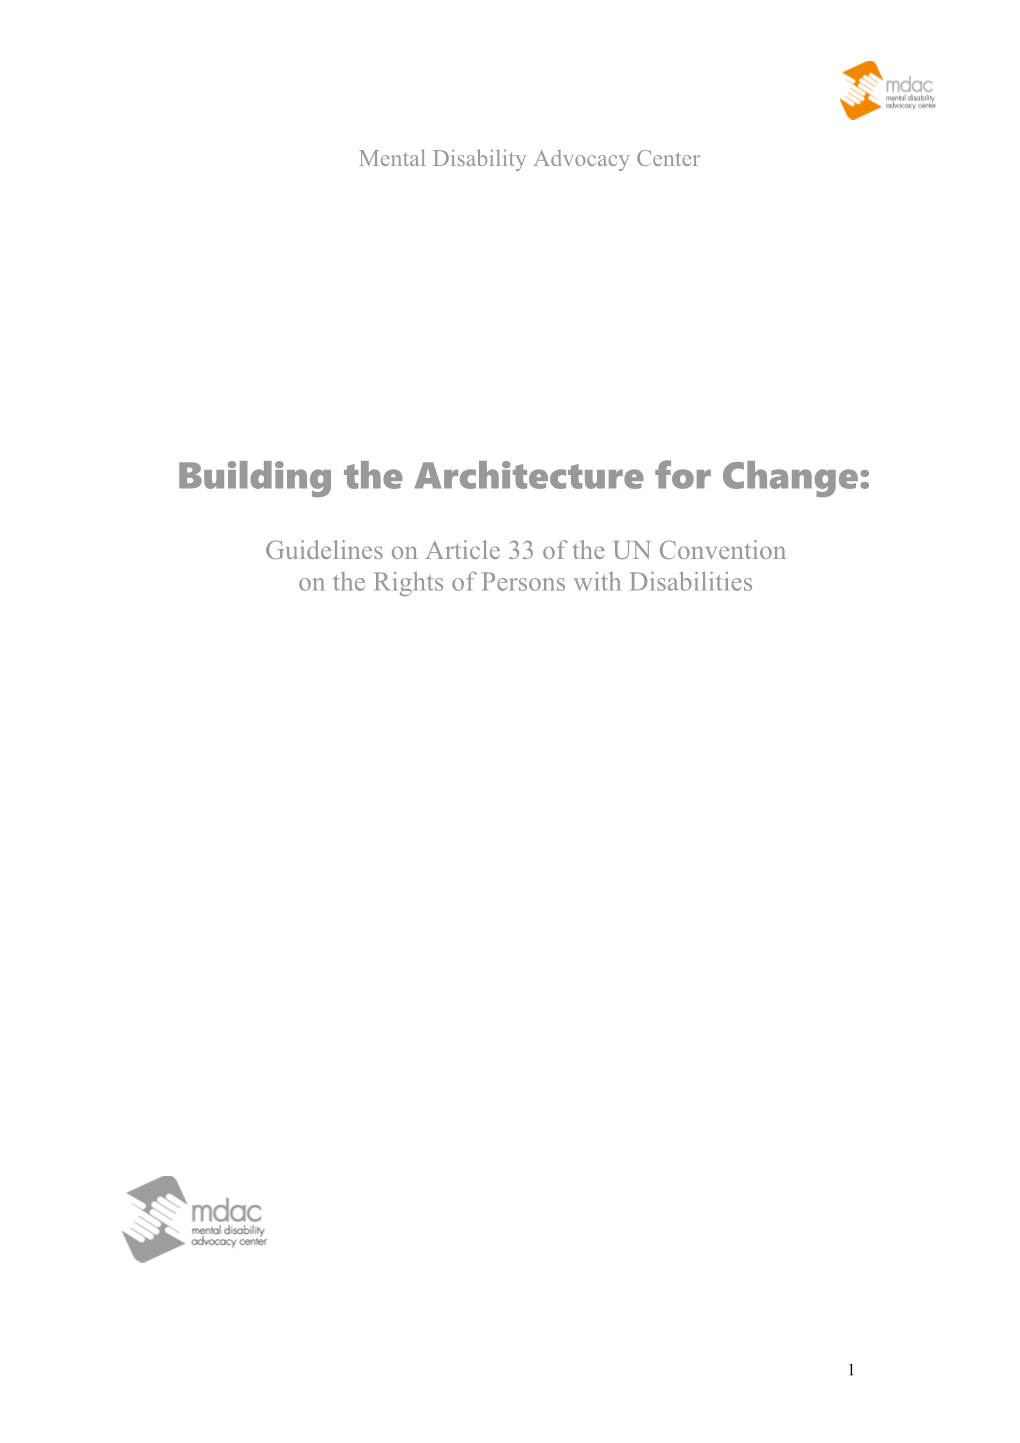 Building the Architecture for Change